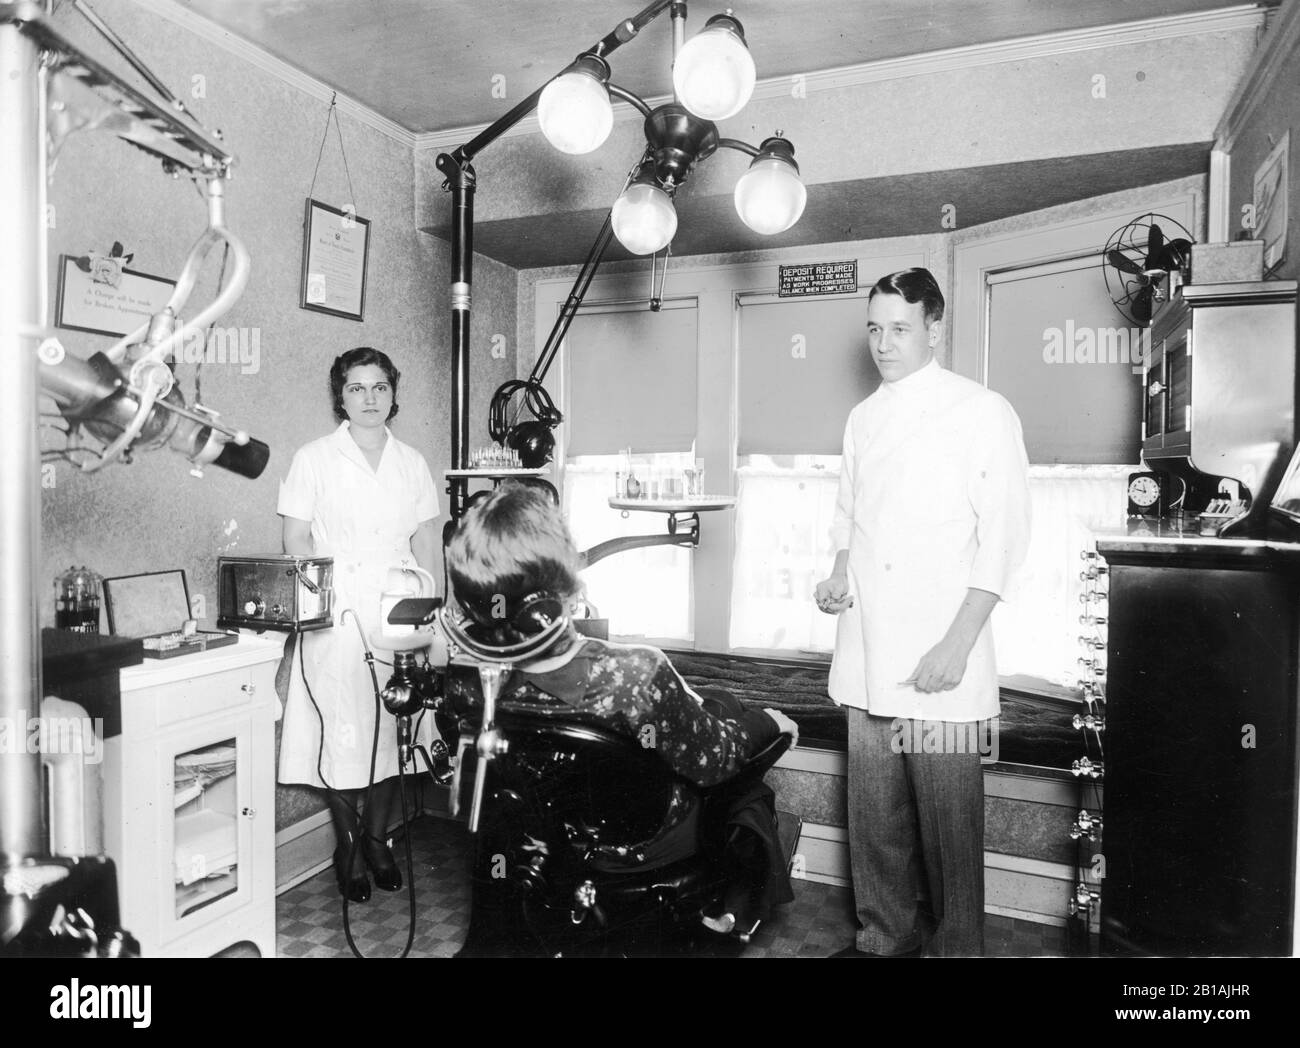 A dental office with the dentist, the woman dental assistant, and all equipment, c. 1925.  Shows the full layout of his medical practice workspace.  To see my other dental-related vintage images, Search:  Prestor  vintage  dental Stock Photo